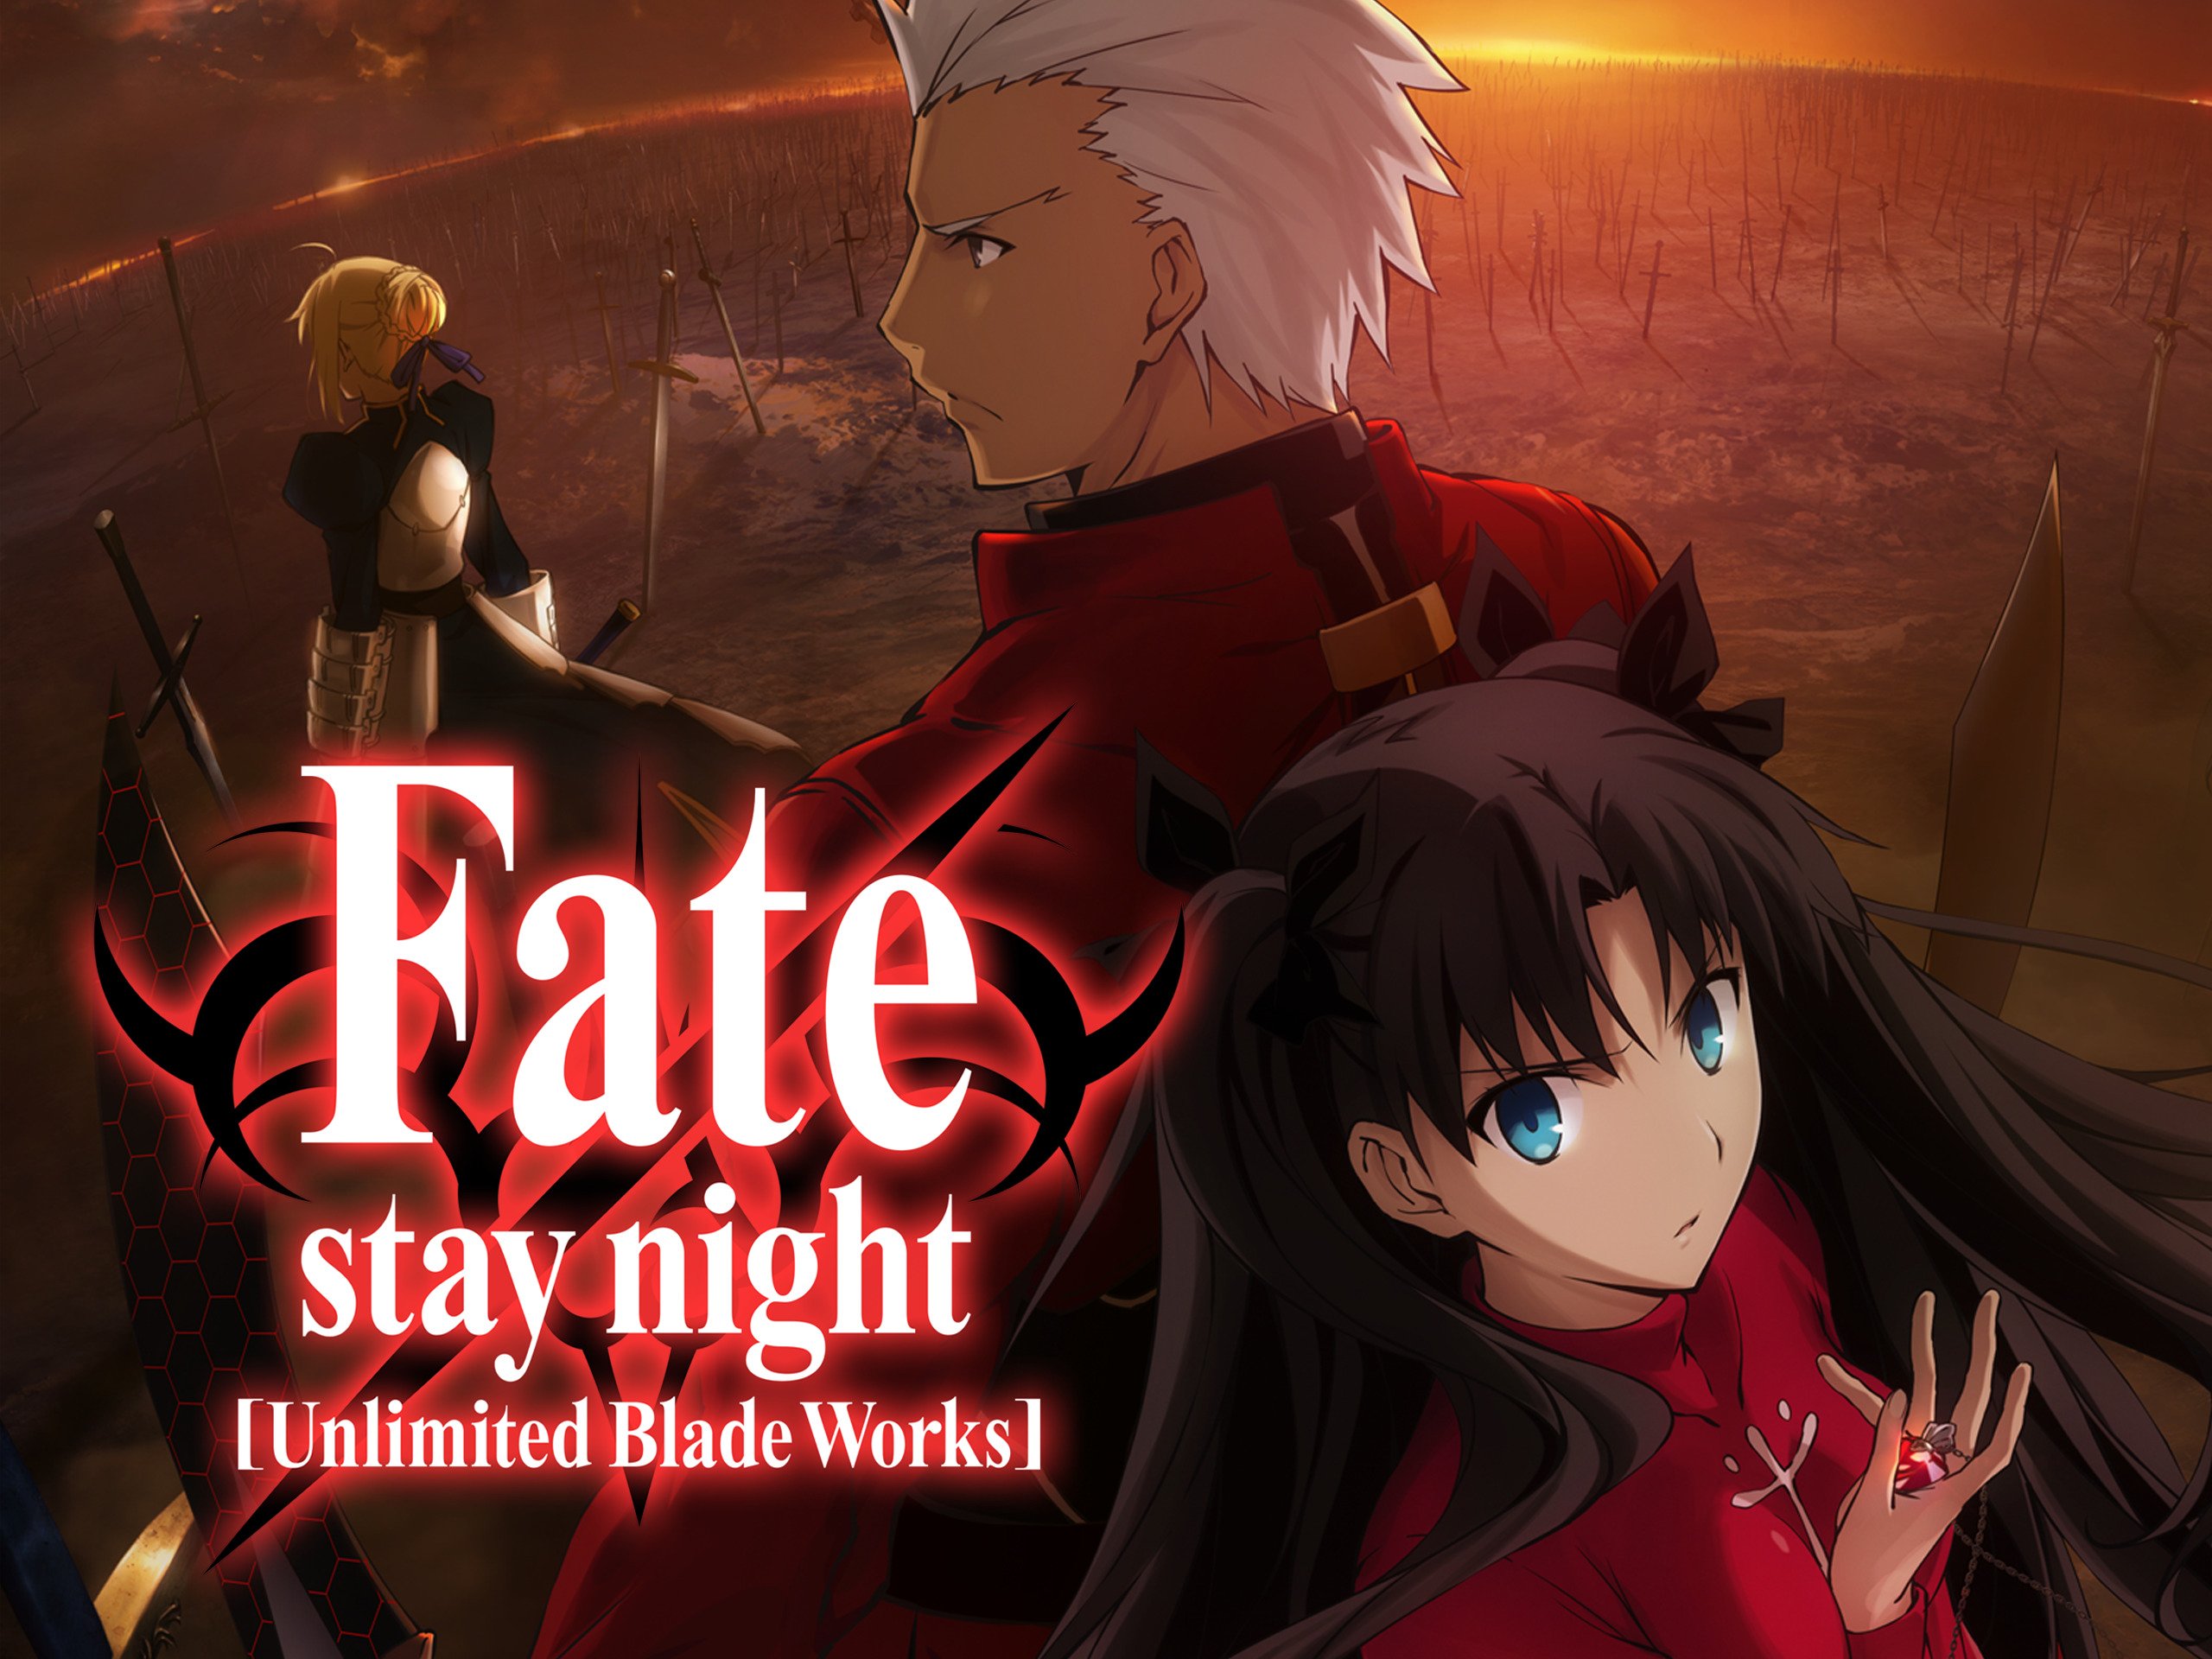 Fate/Stay Night: Unlimited Blade Works la serie tv (Review)